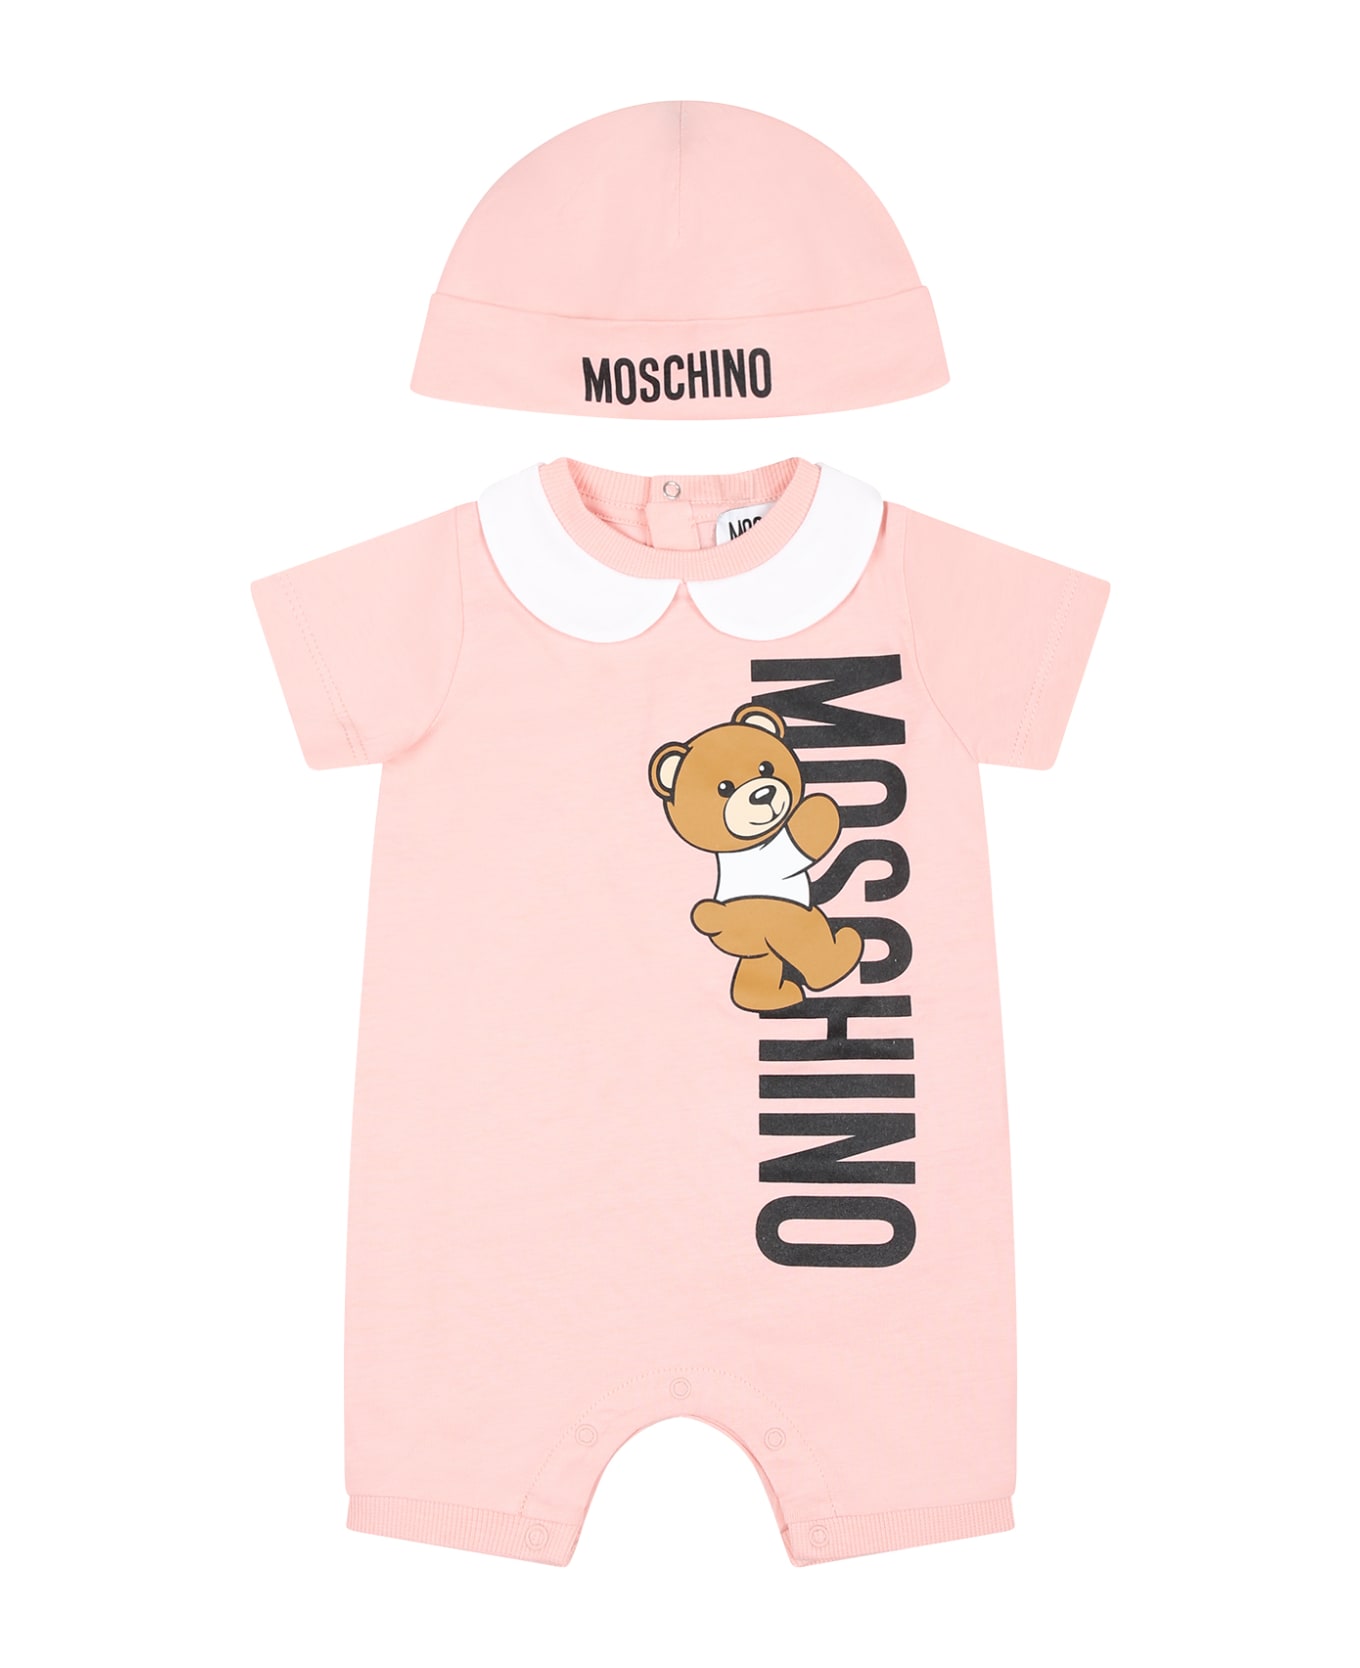 Moschino Pink Set For Baby Girl With Teddy Bear And Logo - Pink